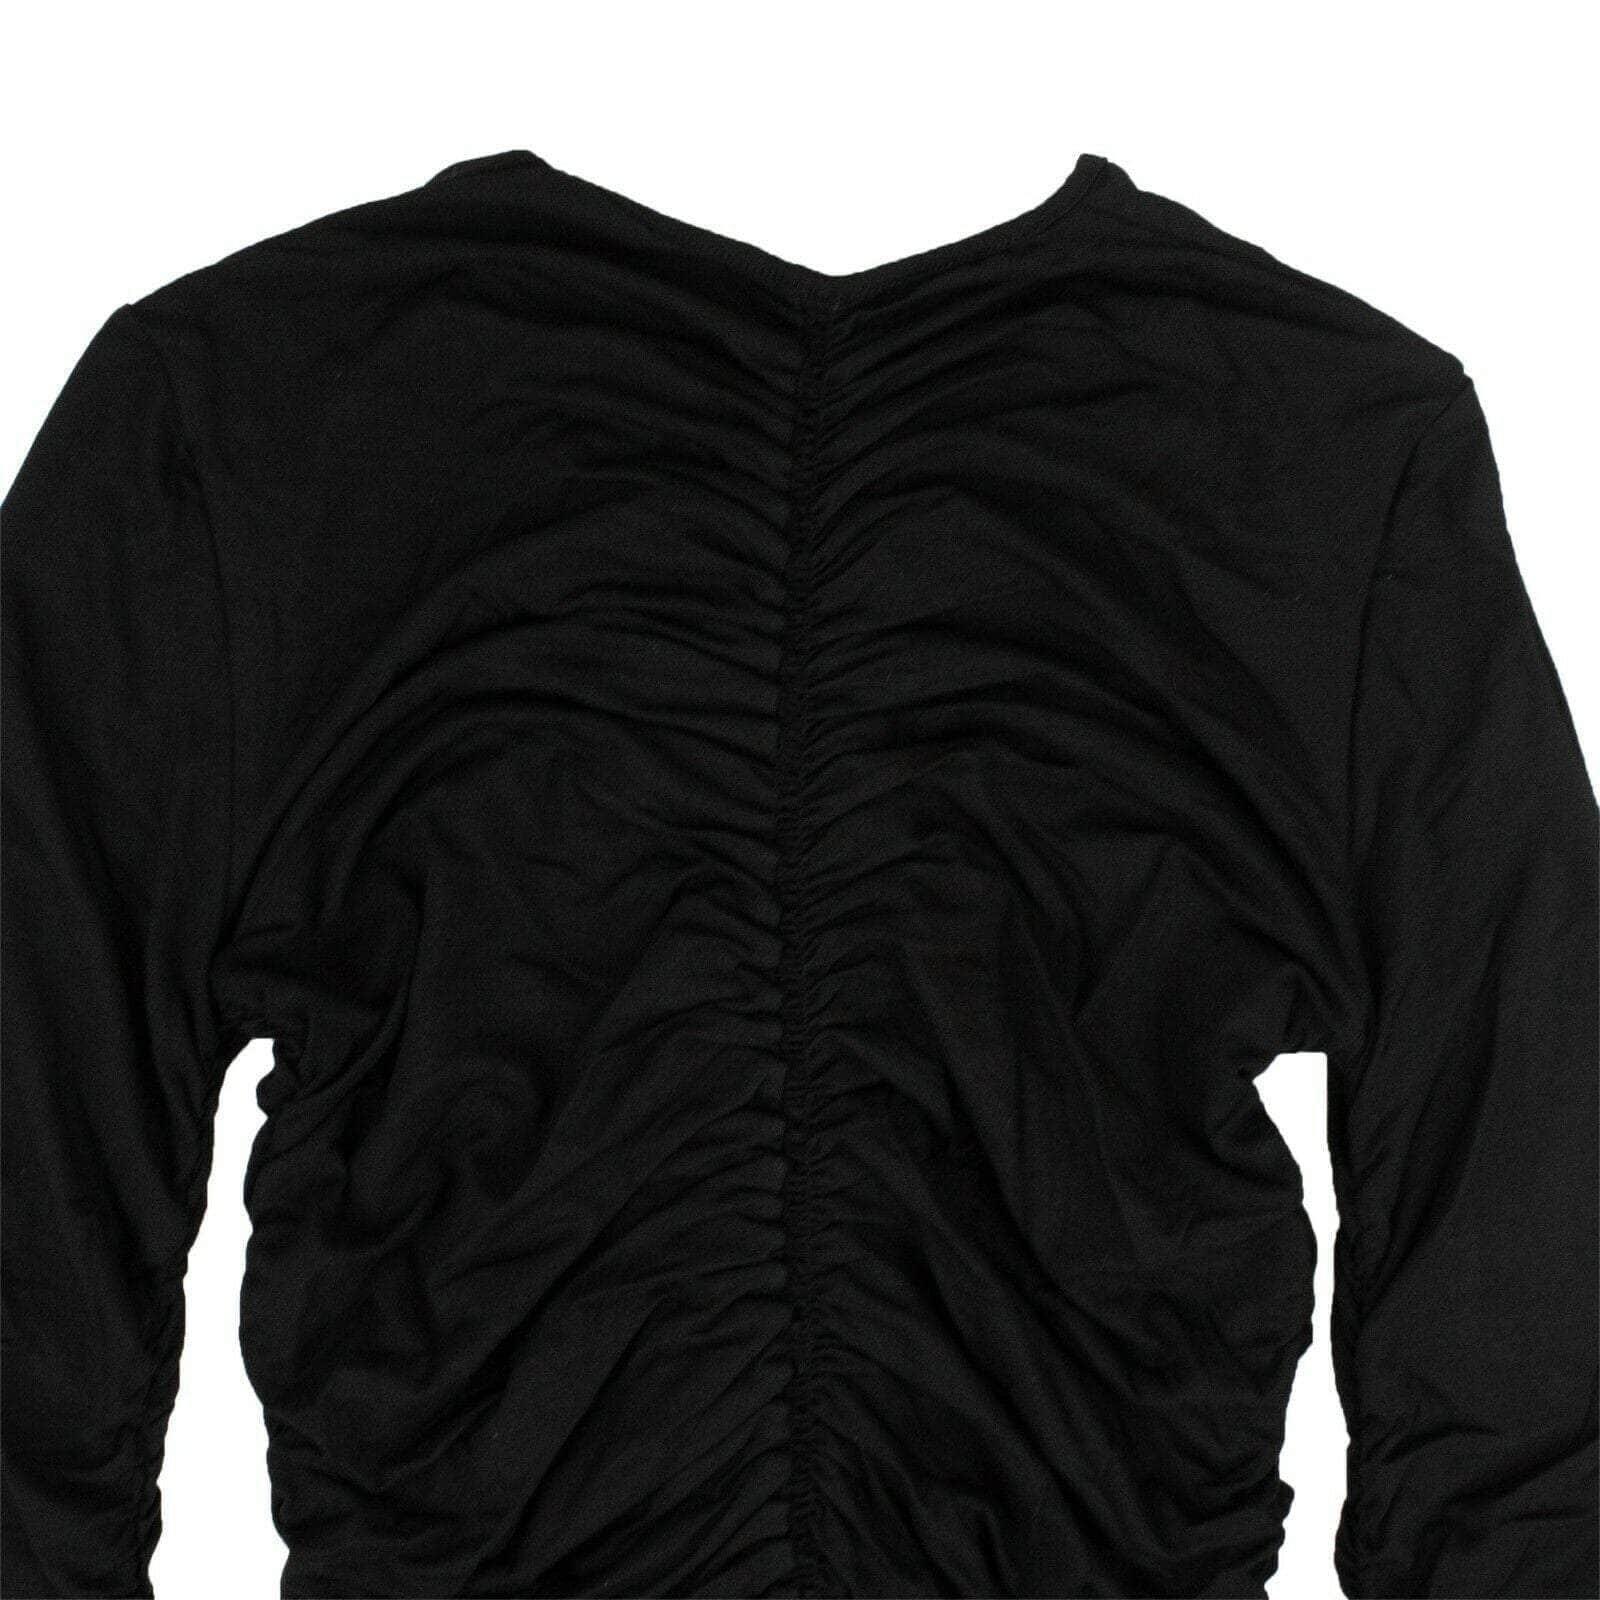 UNRAVEL PROJECT channelenable-all, couponcollection, gender-womens, main-clothing, sale-enable, size-m, size-s, size-xs, under-250, unravel-project M Black Lace Up Long Sleeve Top 82NGG-UN-1073/M 82NGG-UN-1073/M